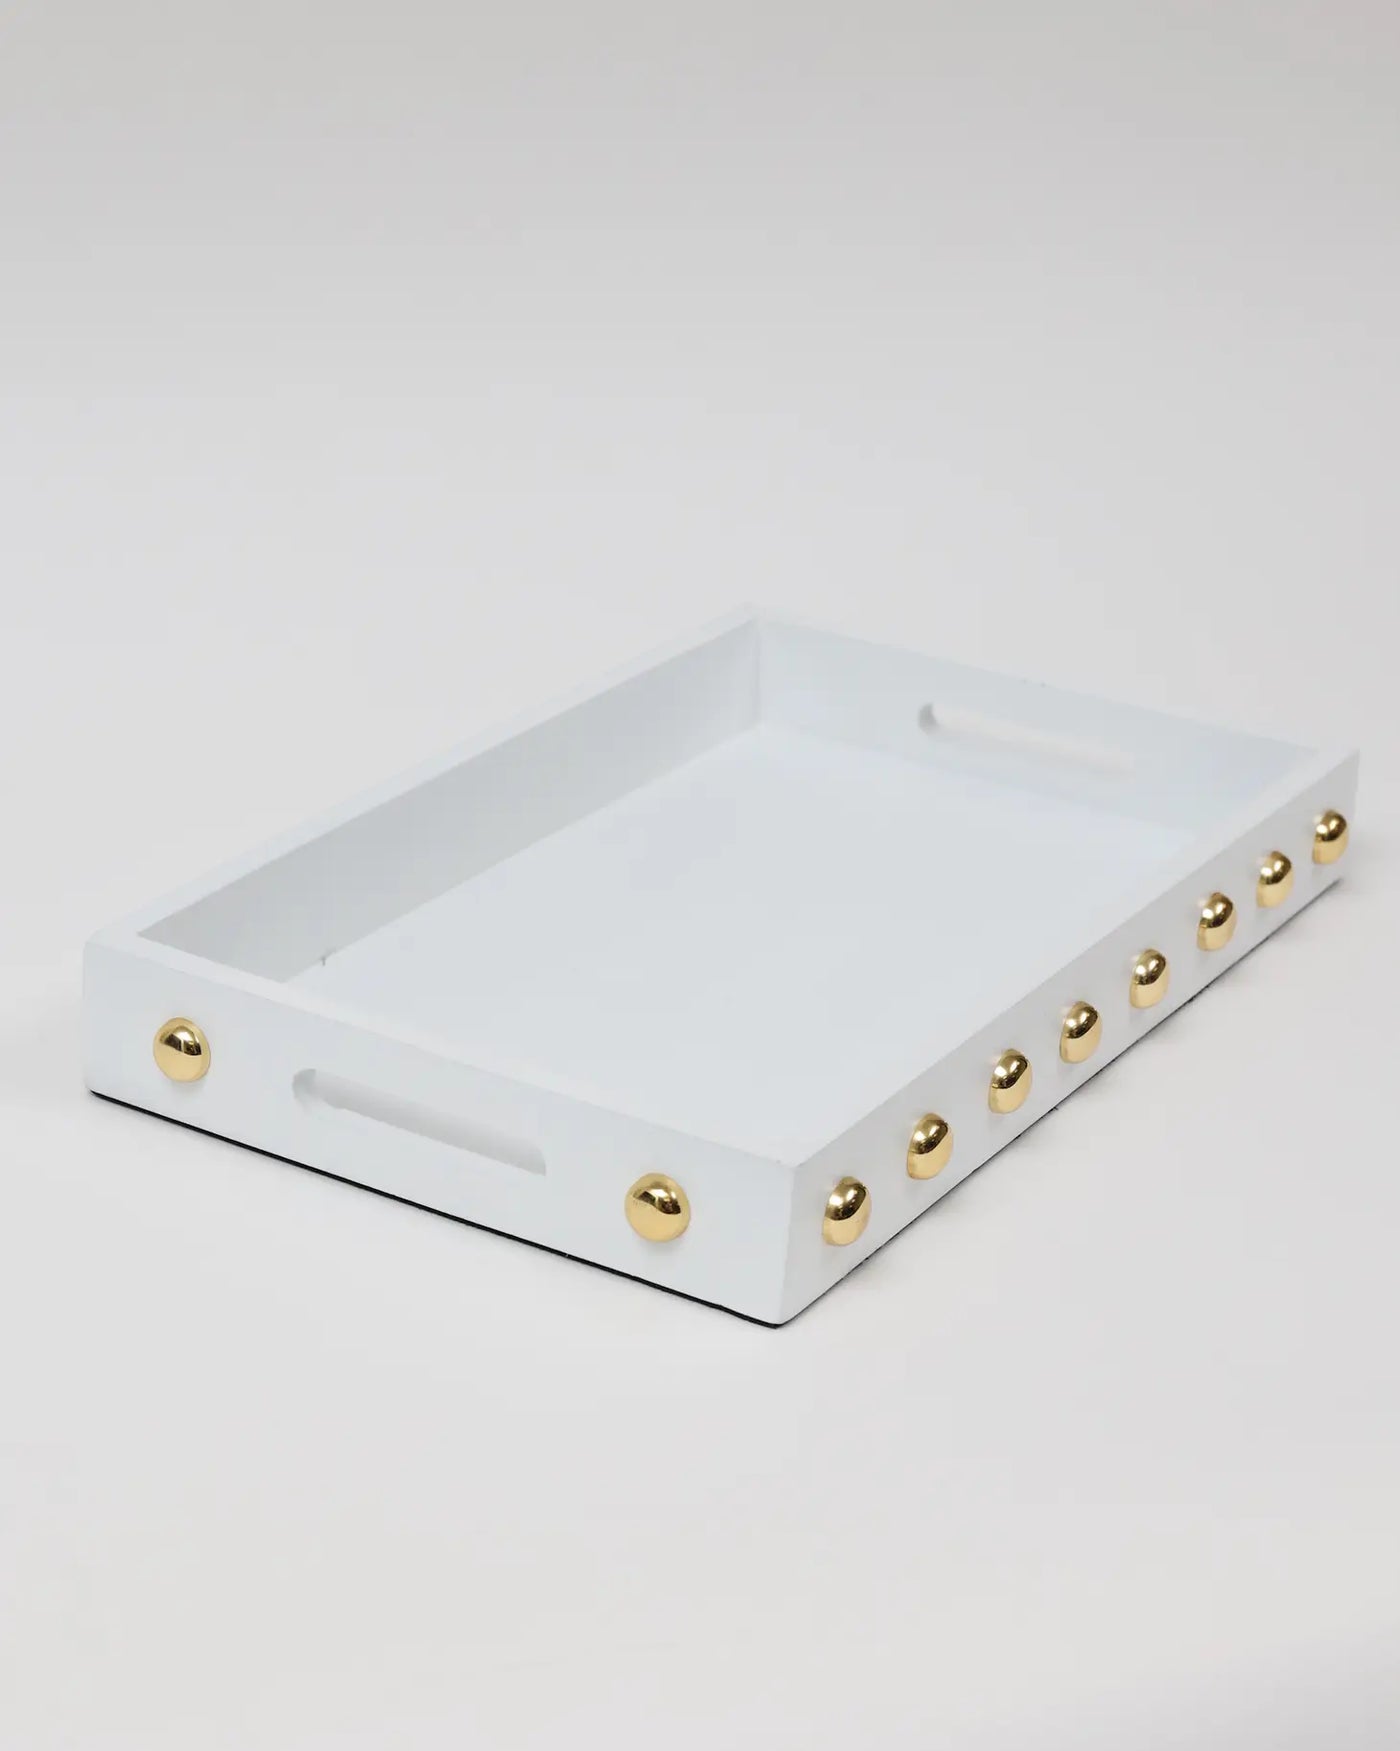 White Decorative Serving Tray With Shiny Gold Ball Design